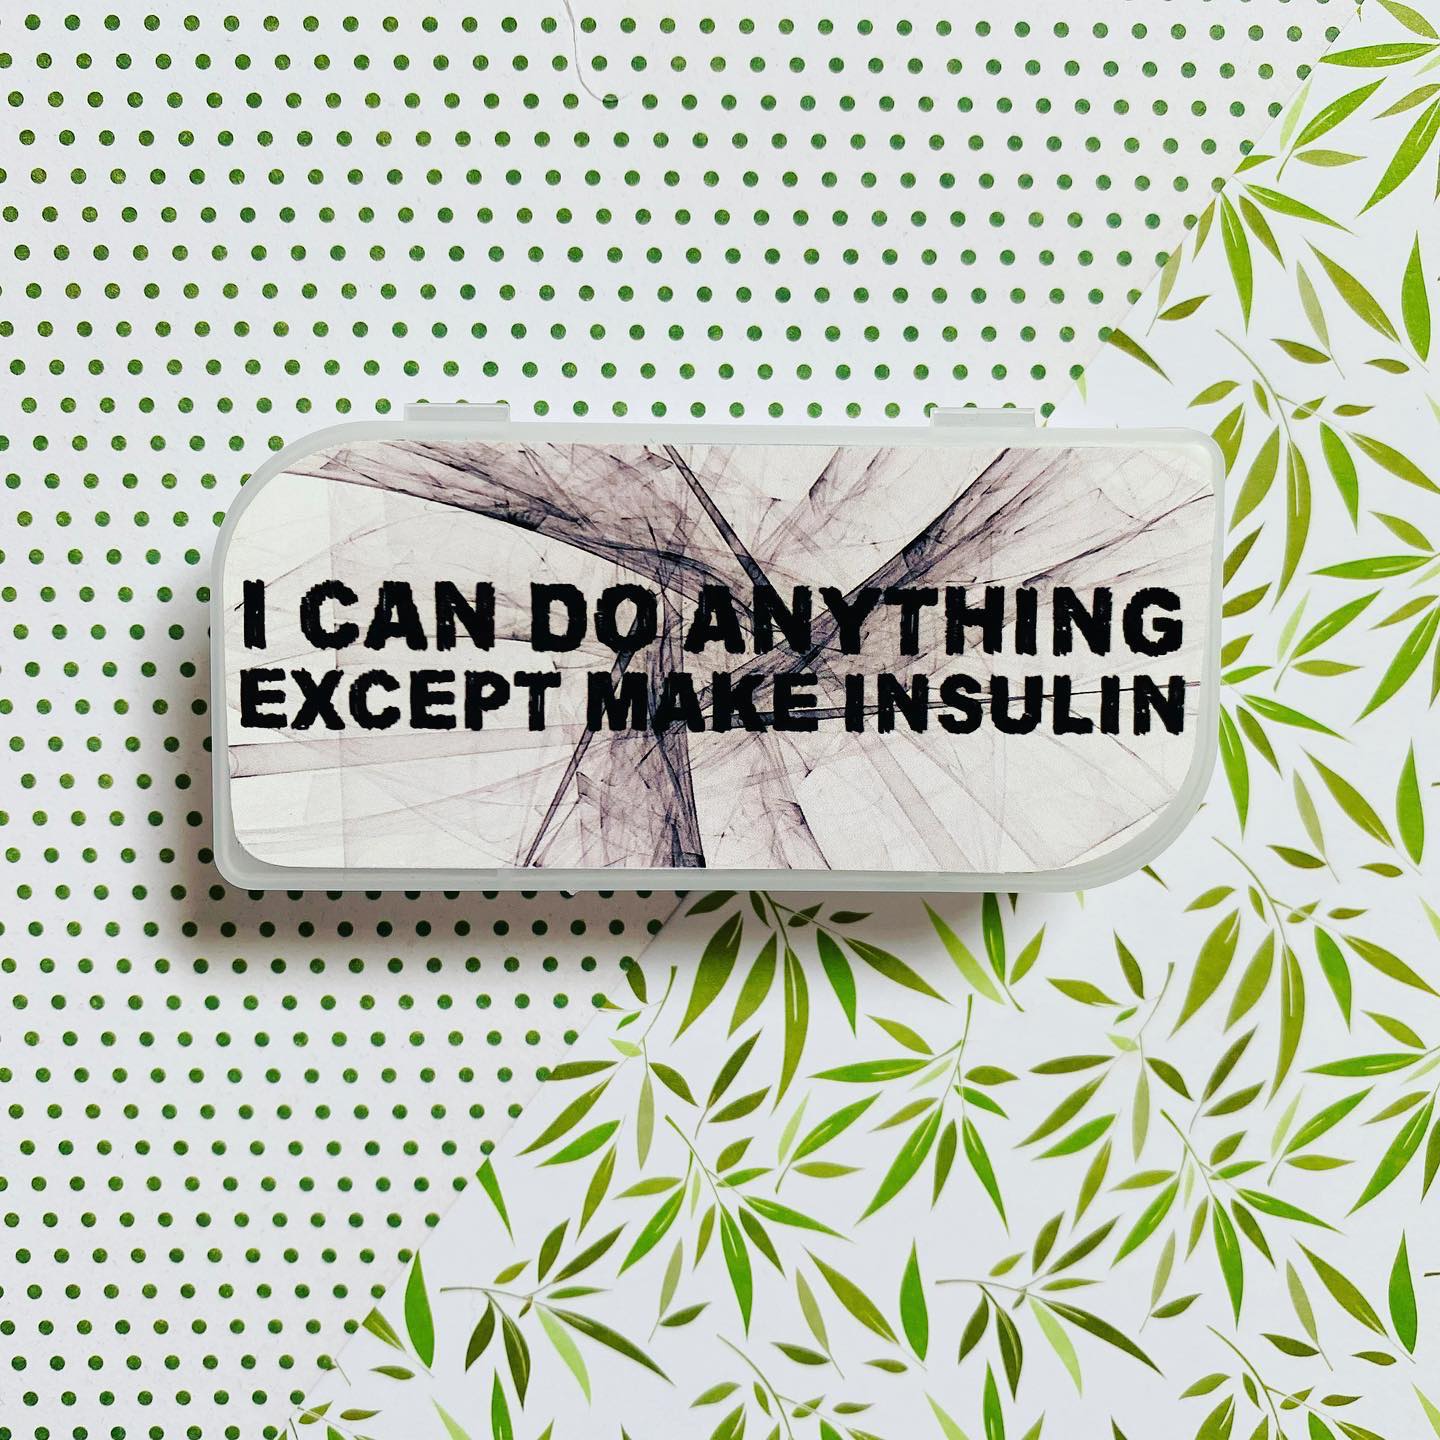 Hypo Pot - I Can Do Anything Except Make Insulin